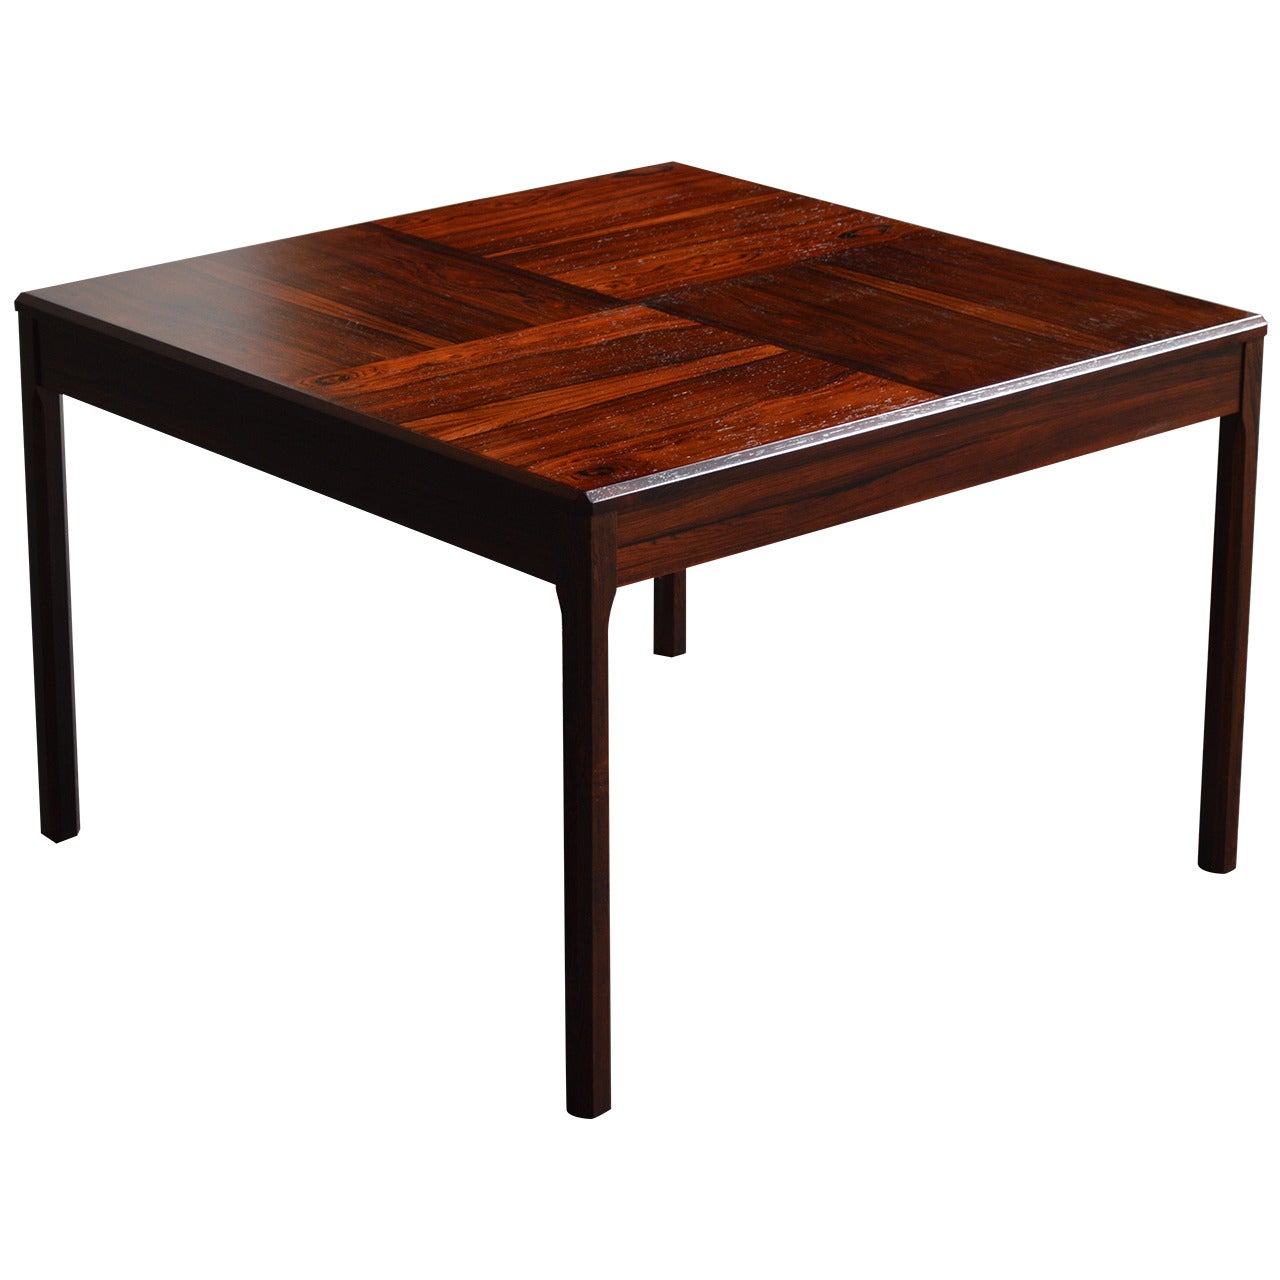 Swedish Midcentury Coffee or Side Table in Rosewood with Parquetry Top